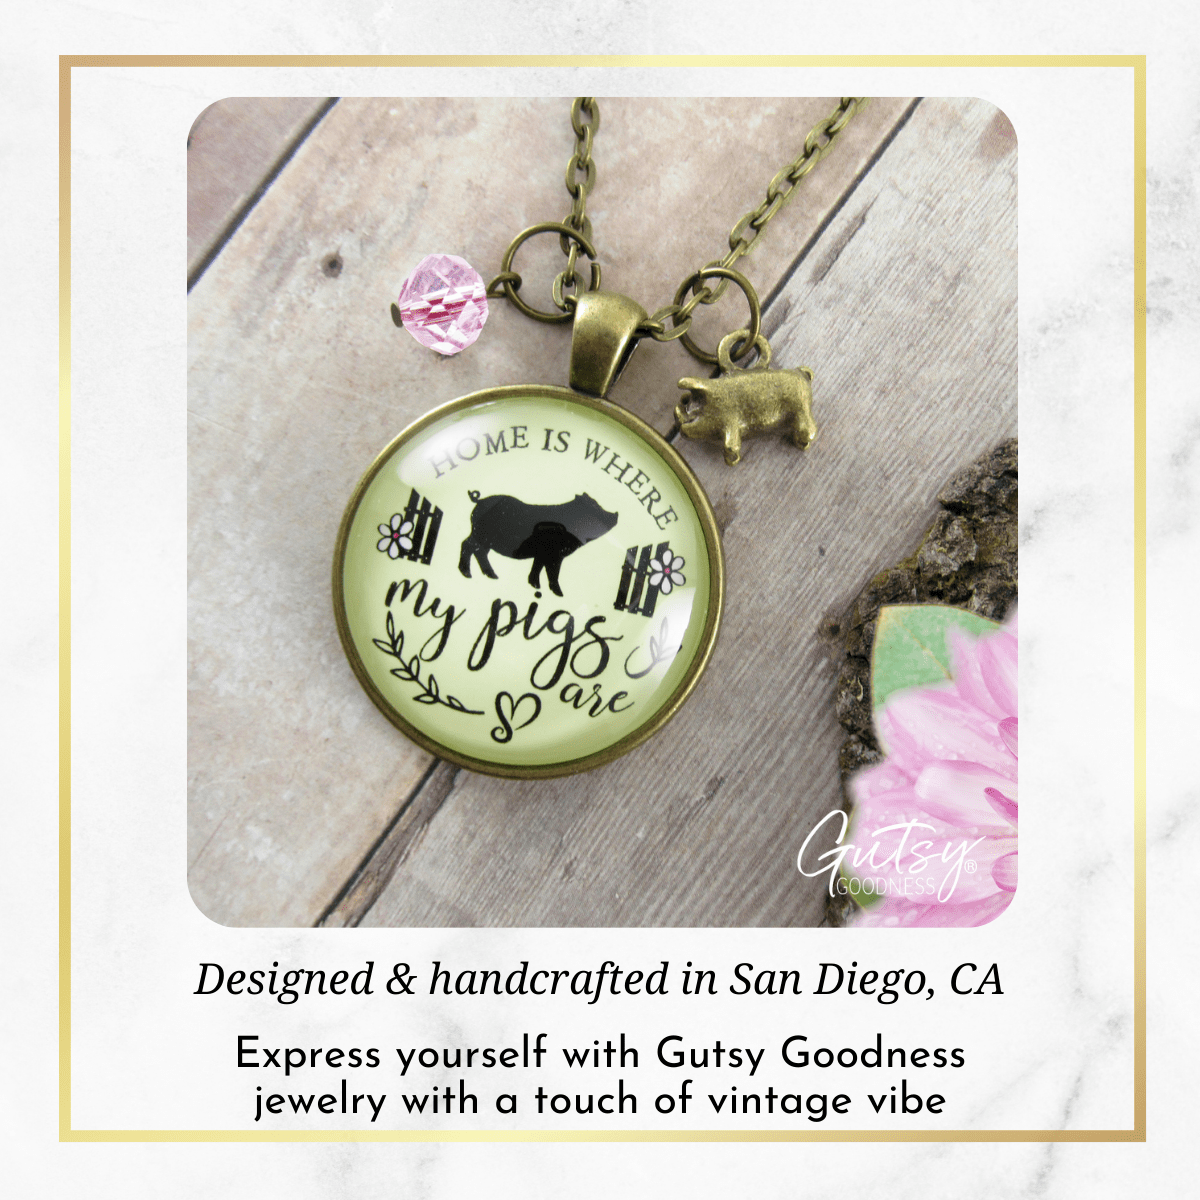 Gutsy Goodness Pig Necklace Home is Where My Pigs are Farmer Girl Inspired Jewelry - Gutsy Goodness;Pig Necklace Home Is Where My Pigs Are Farmer Girl Inspired Jewelry - Gutsy Goodness Handmade Jewelry Gifts